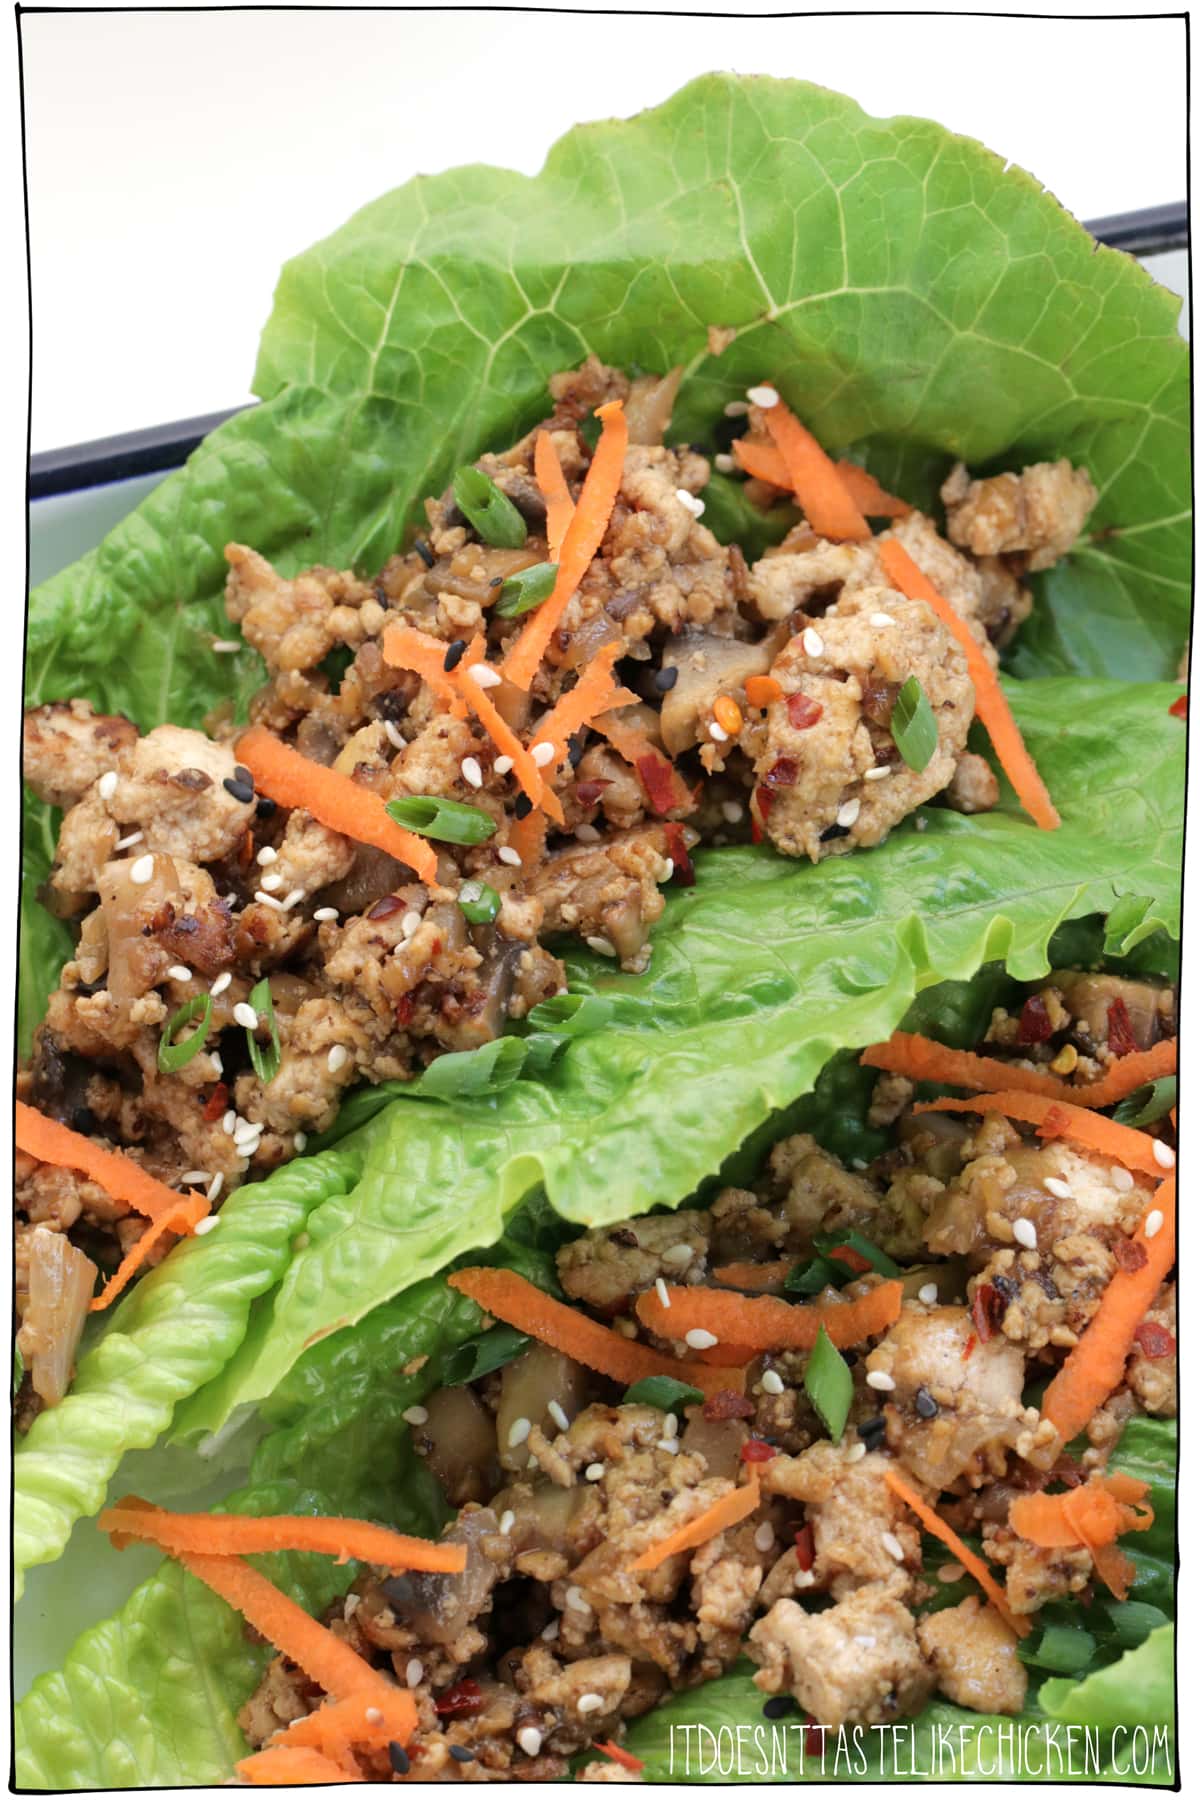 Vegan Mushroom Tofu Lettuce Wraps! These lettuce wraps are easy and quick to make and are incredibly delicious. Perfect for an appetizer or light meal. Meal prep friendly! #itdoesnttastelikechicken #veganrecipes #tofu